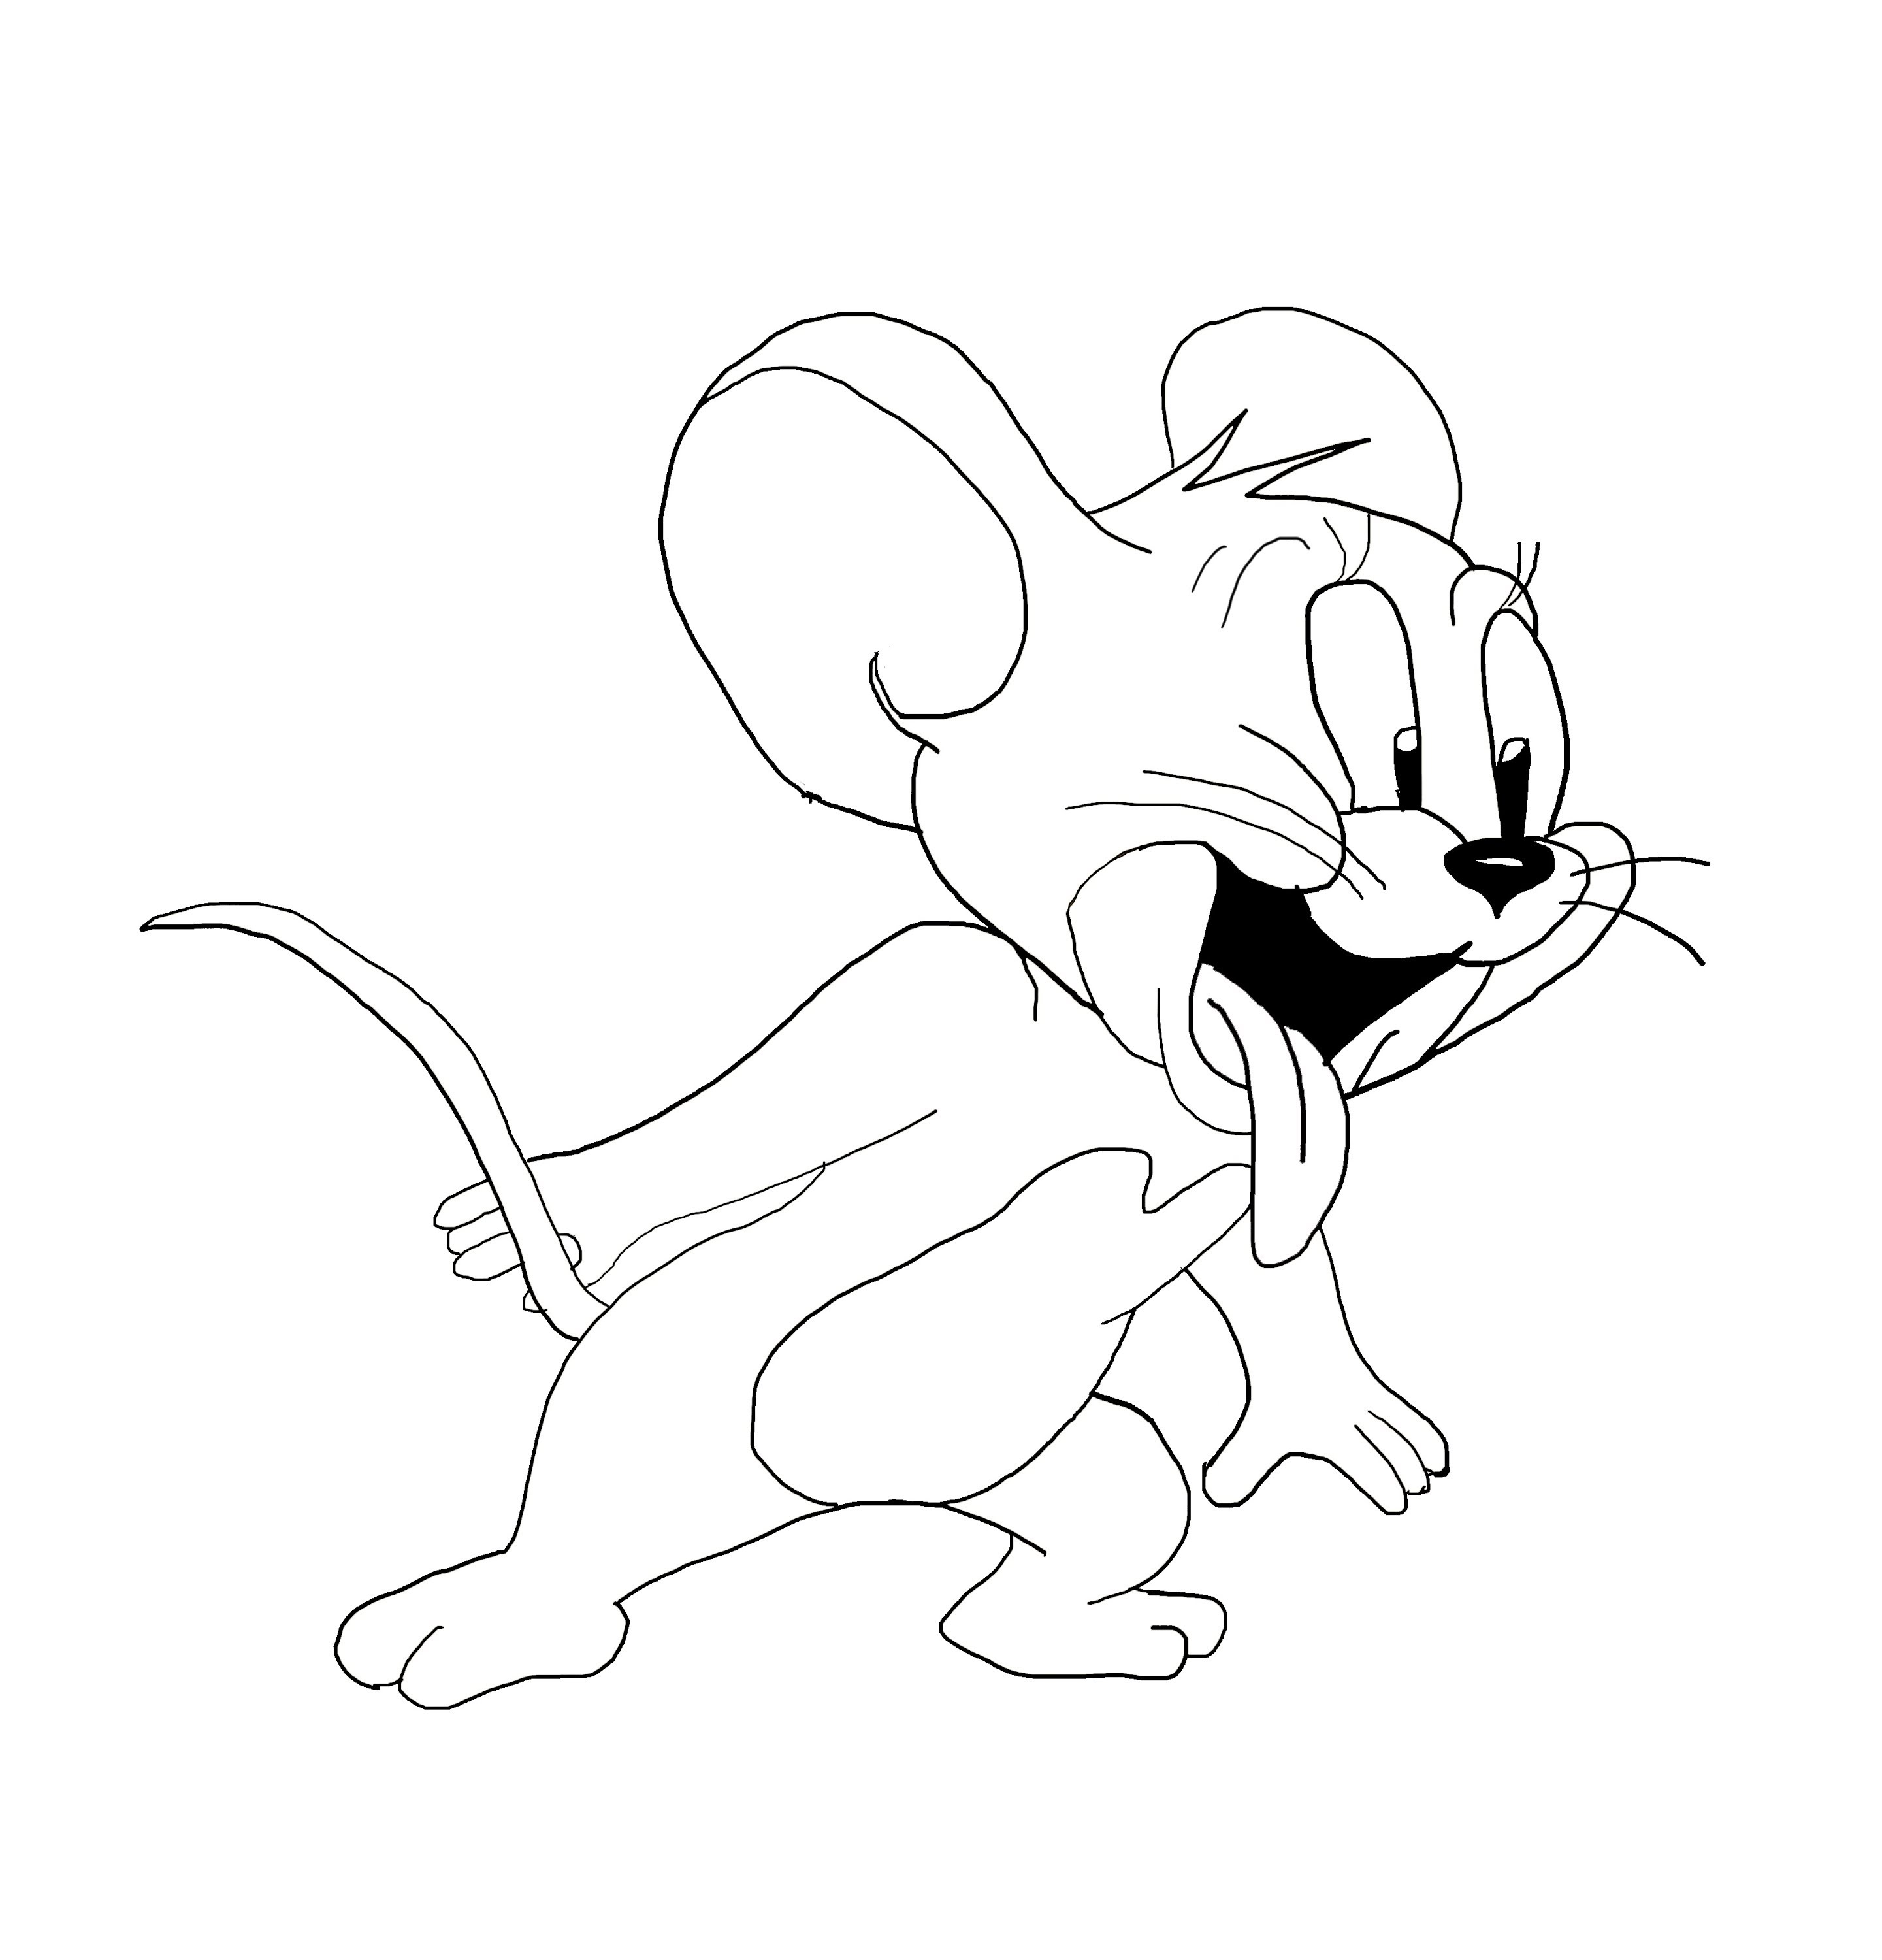 Tom and Jerry  Tom and Jerry Being Best Friend Coloring Page  Cartoon  coloring pages Cartoon character tattoos Cartoon drawings